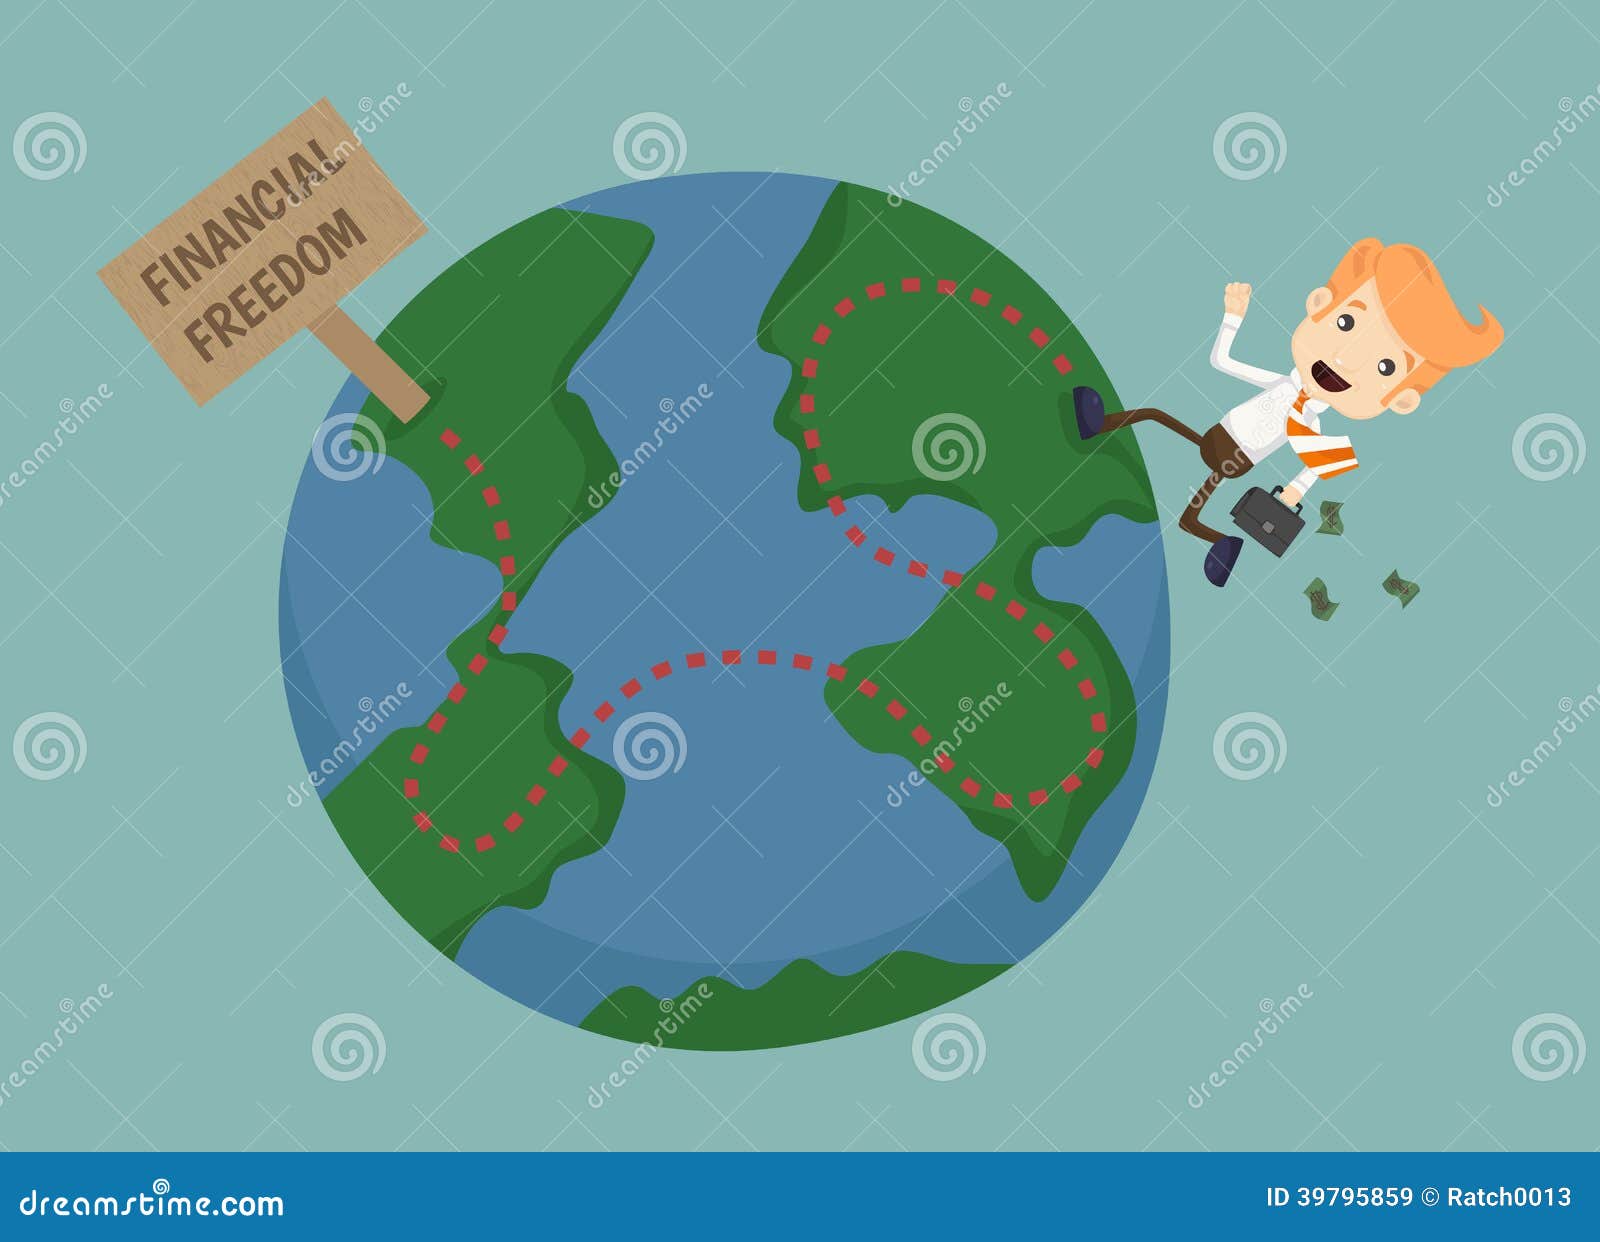 Businessman Go To Financial Freedom Stock Vector - Illustration of ...